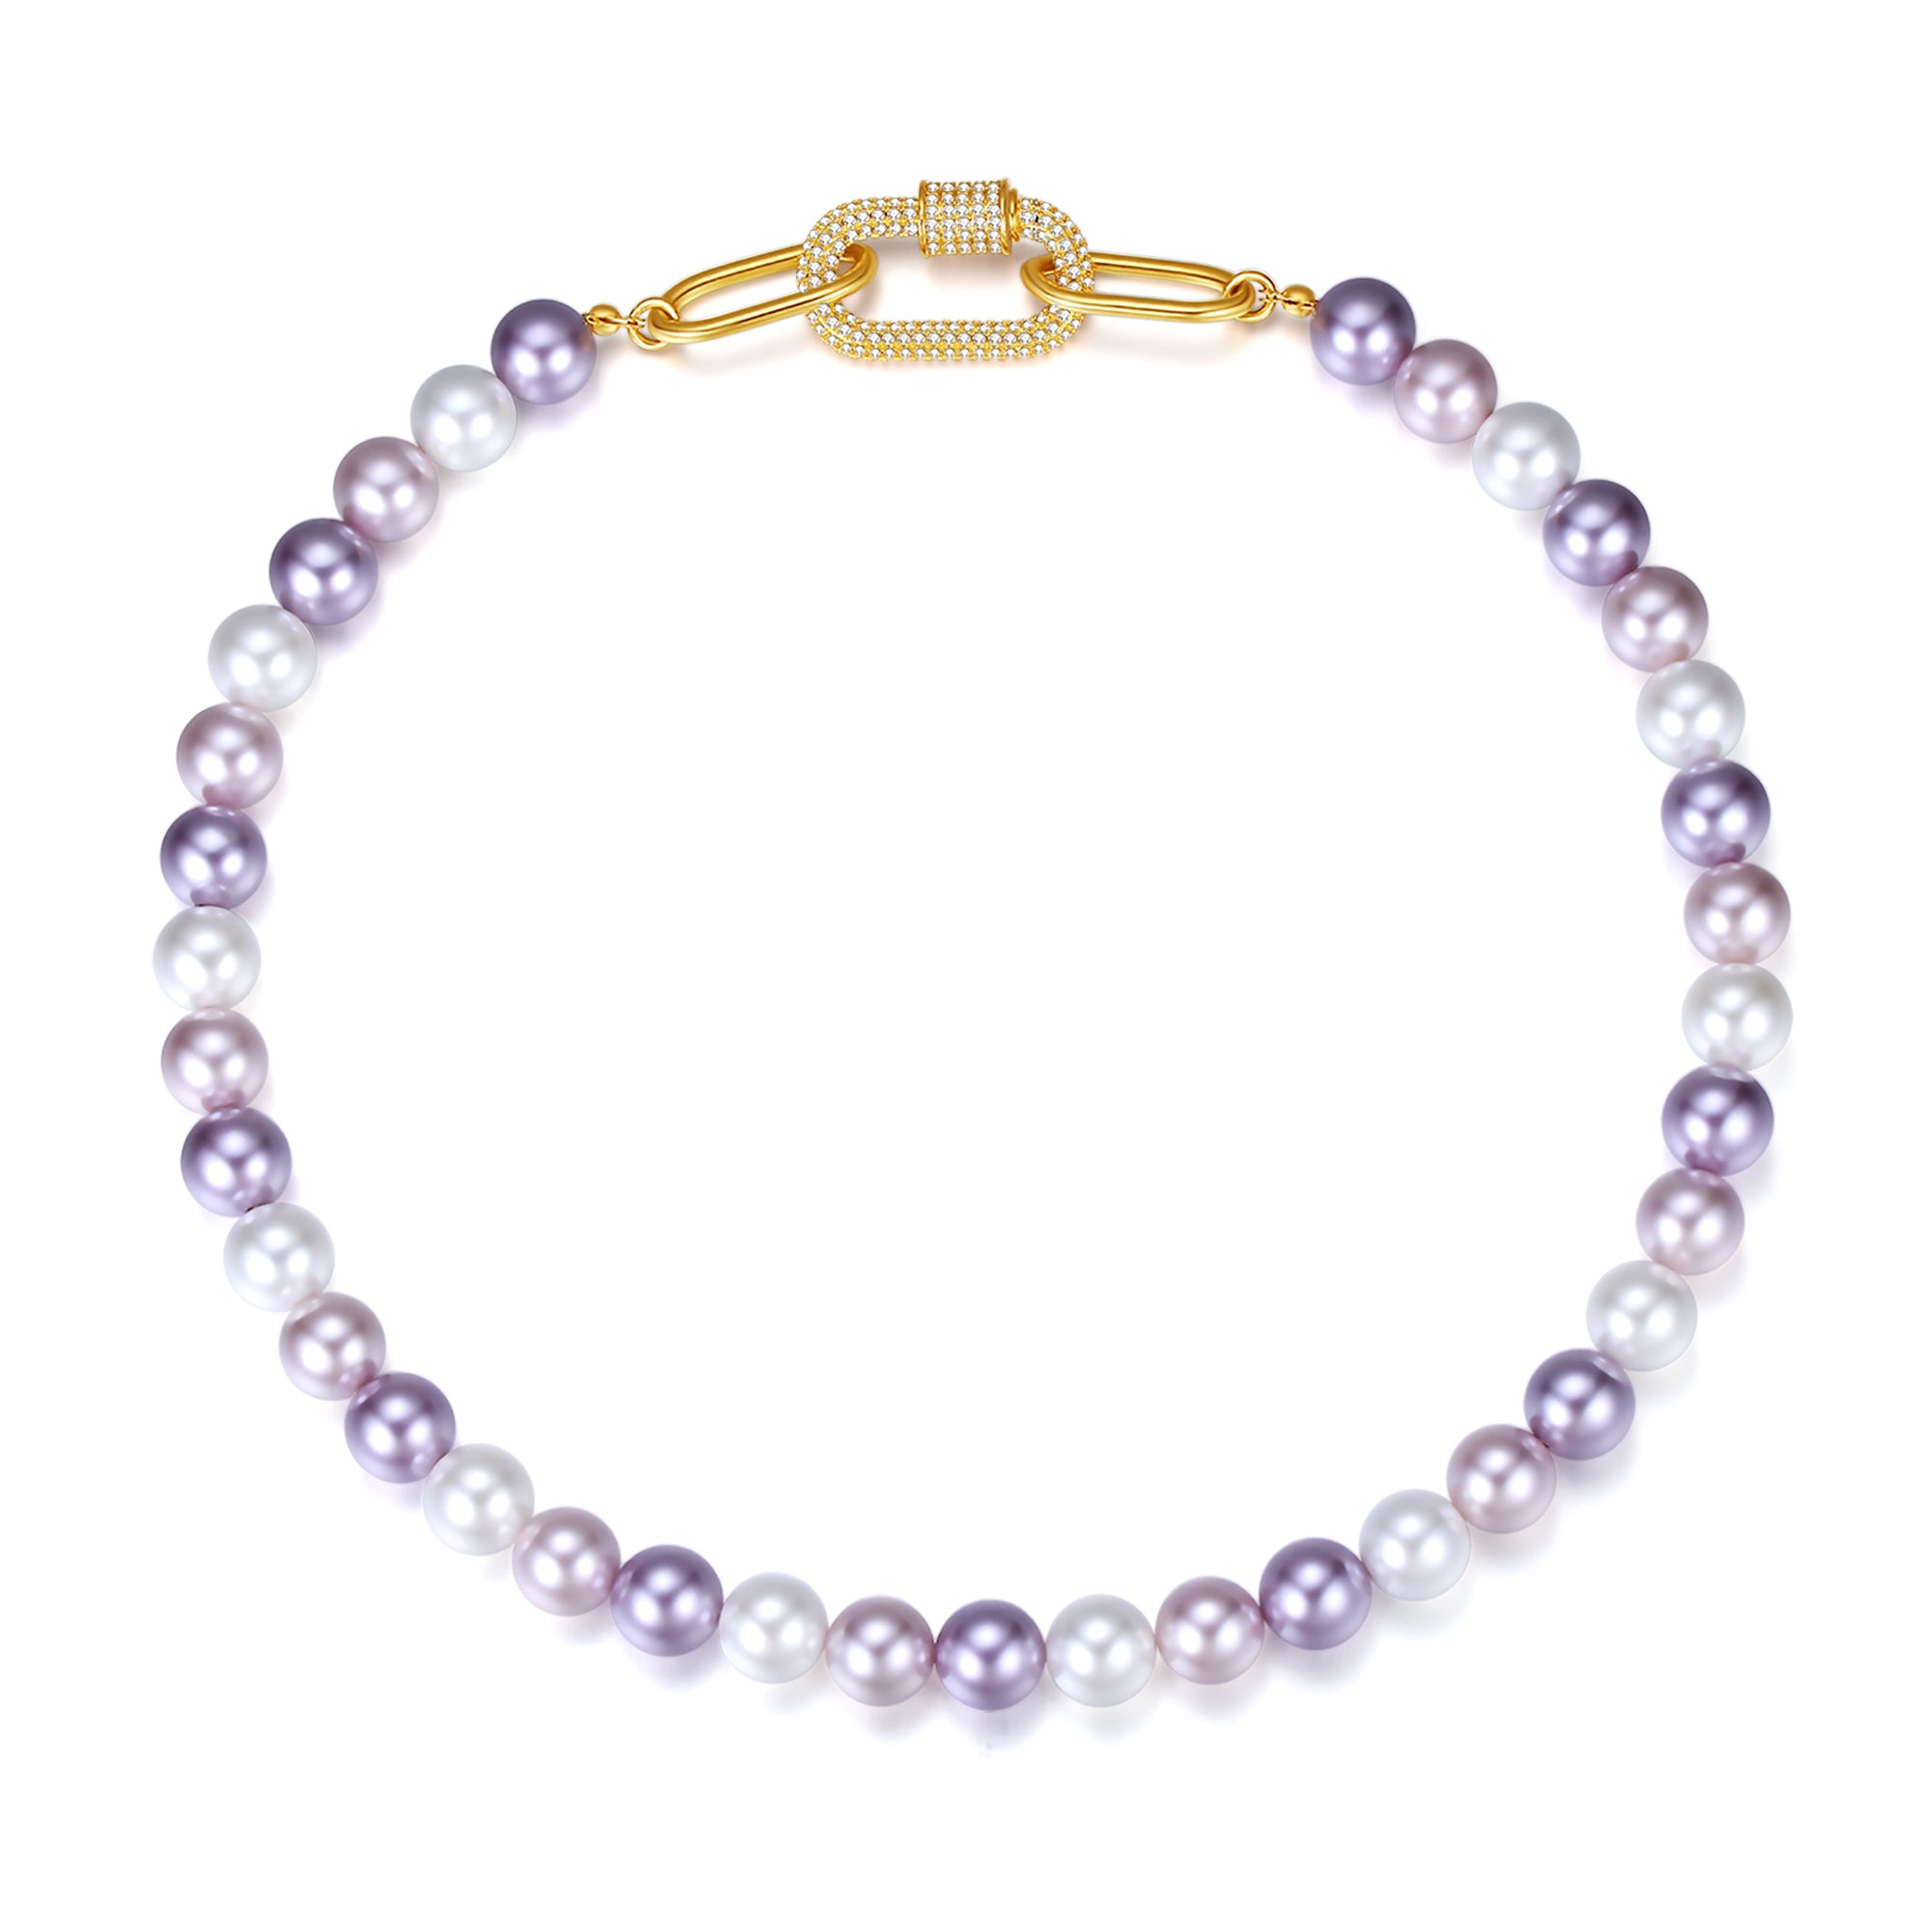 Classicharms Purple Shell Pearl Necklace with Gem-Encrusted  Carabiner Lock - shop idPearl